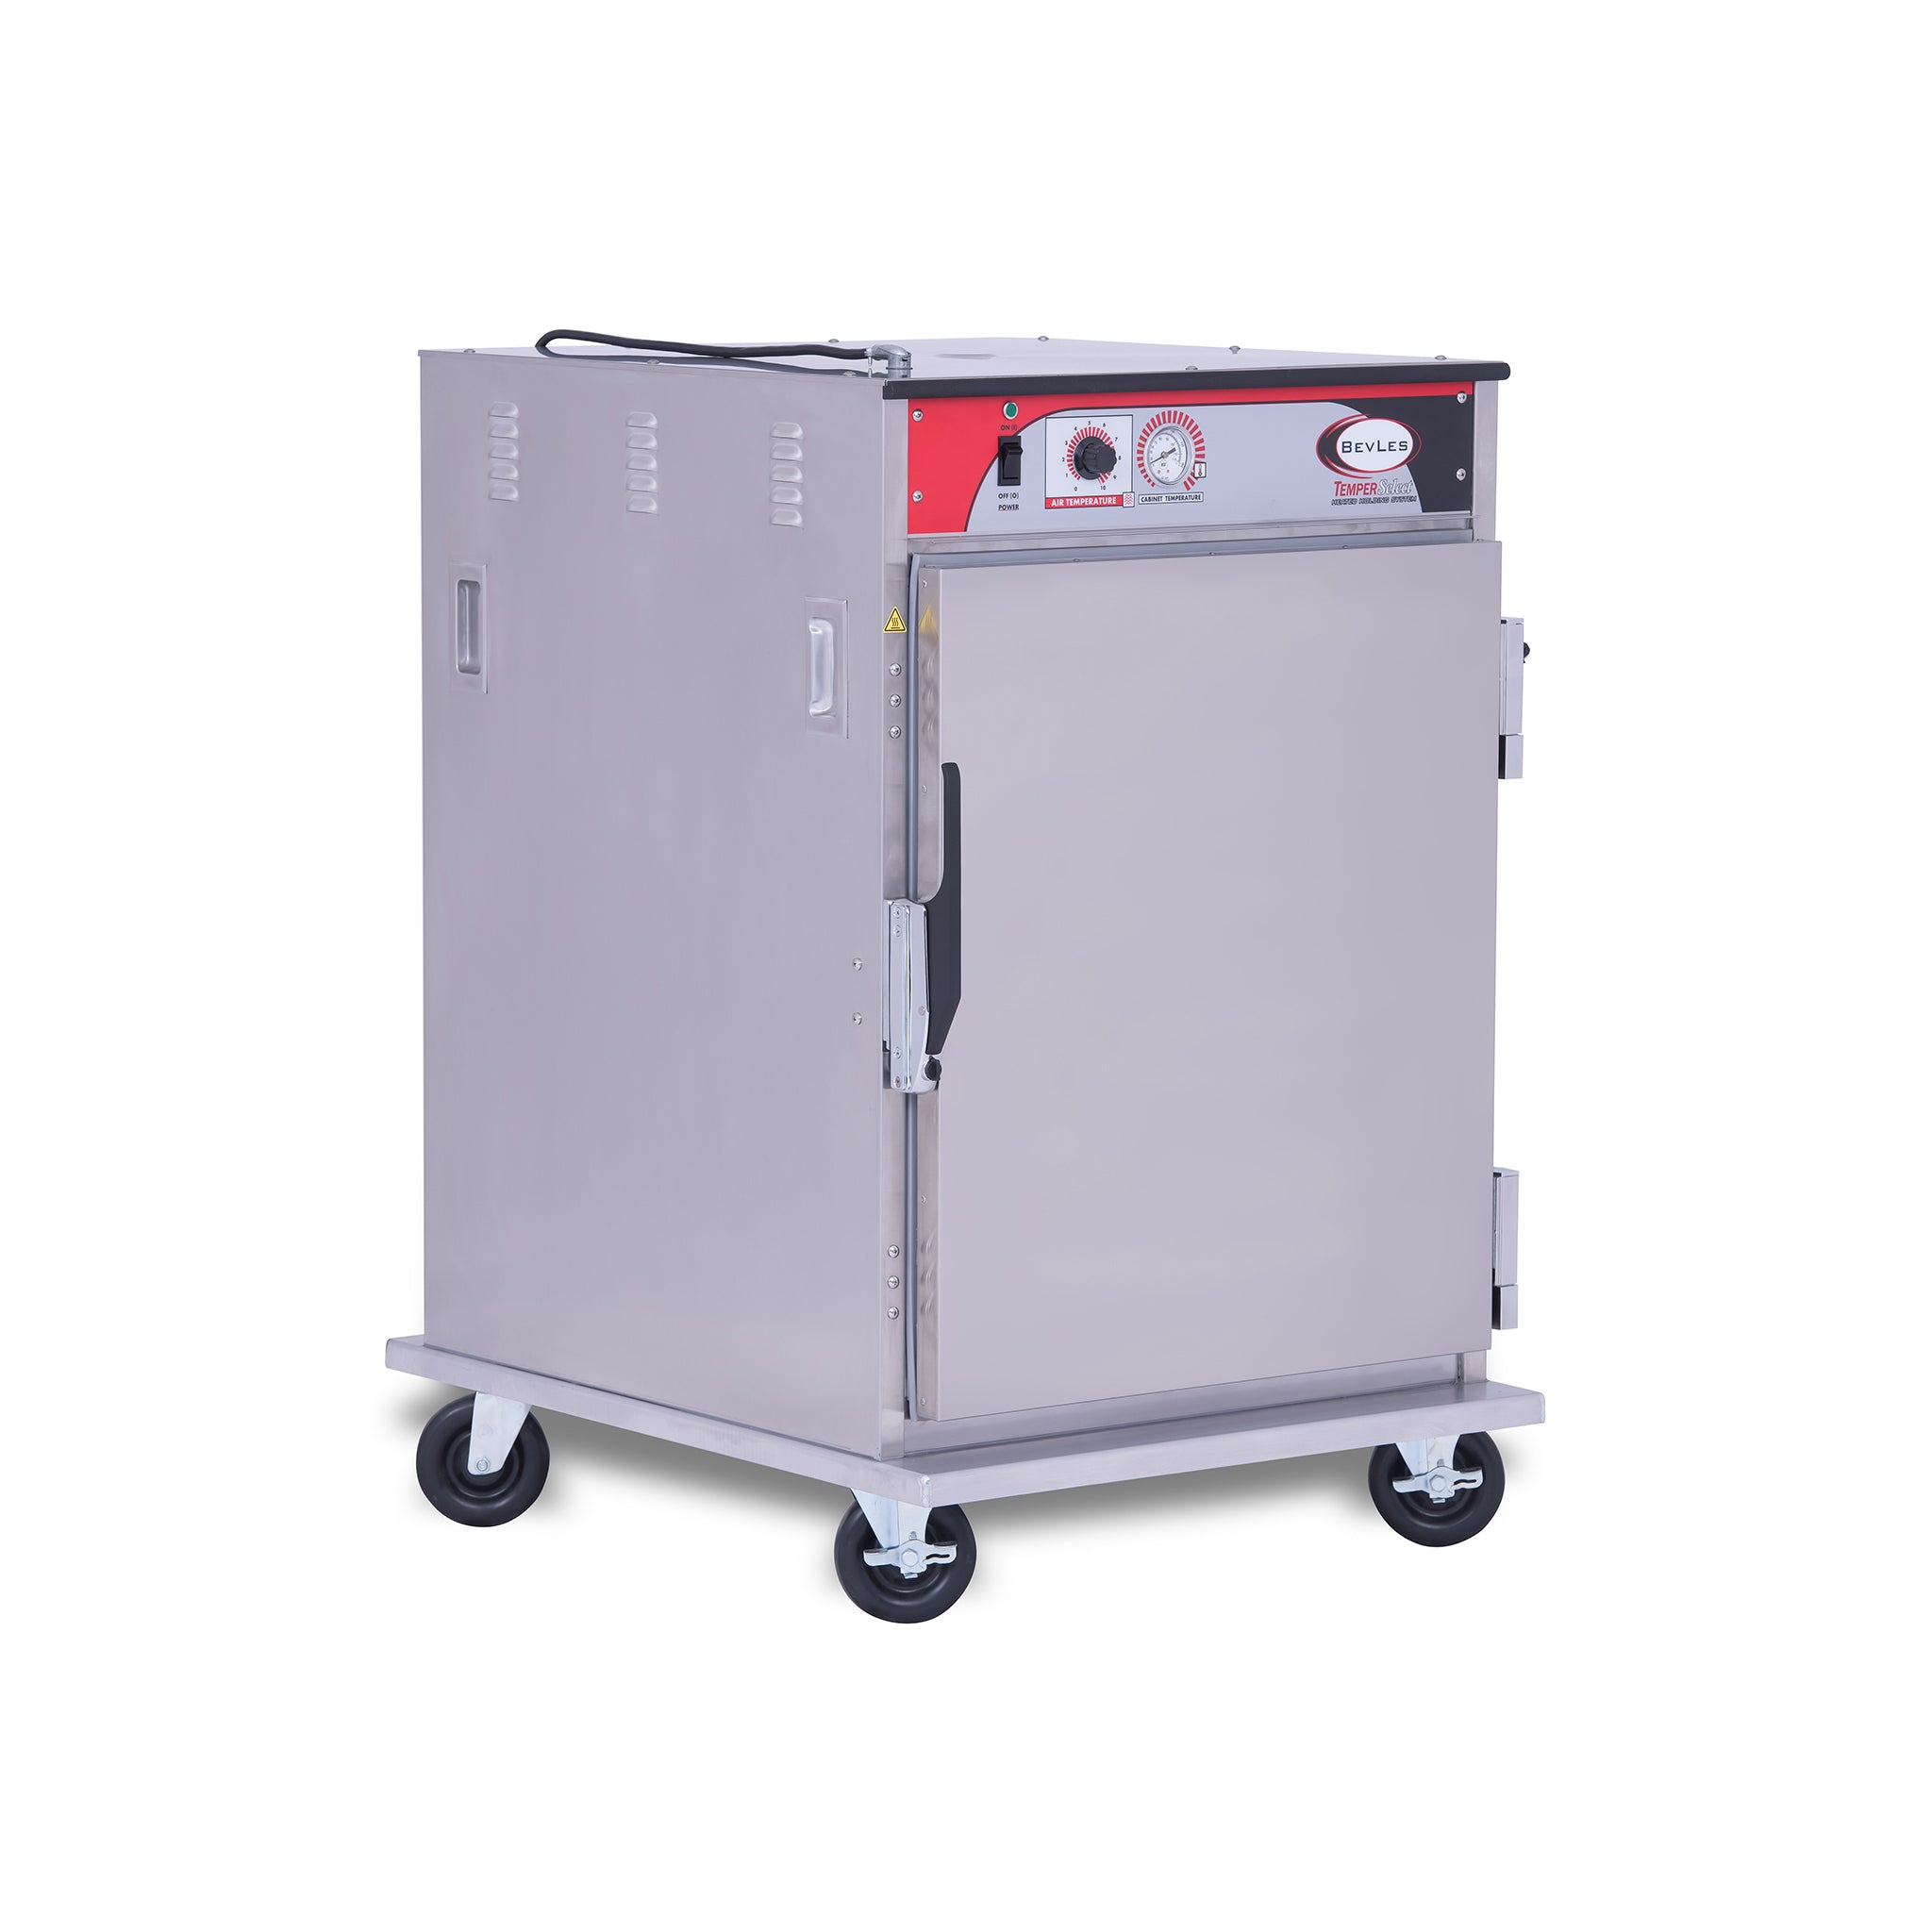 BevLes - HTSS44P81-PT, BevLes Temper Select - Pass Thru 1/2 Size Heated Holding Cabinet, Narrow Width, 115V, in Silver